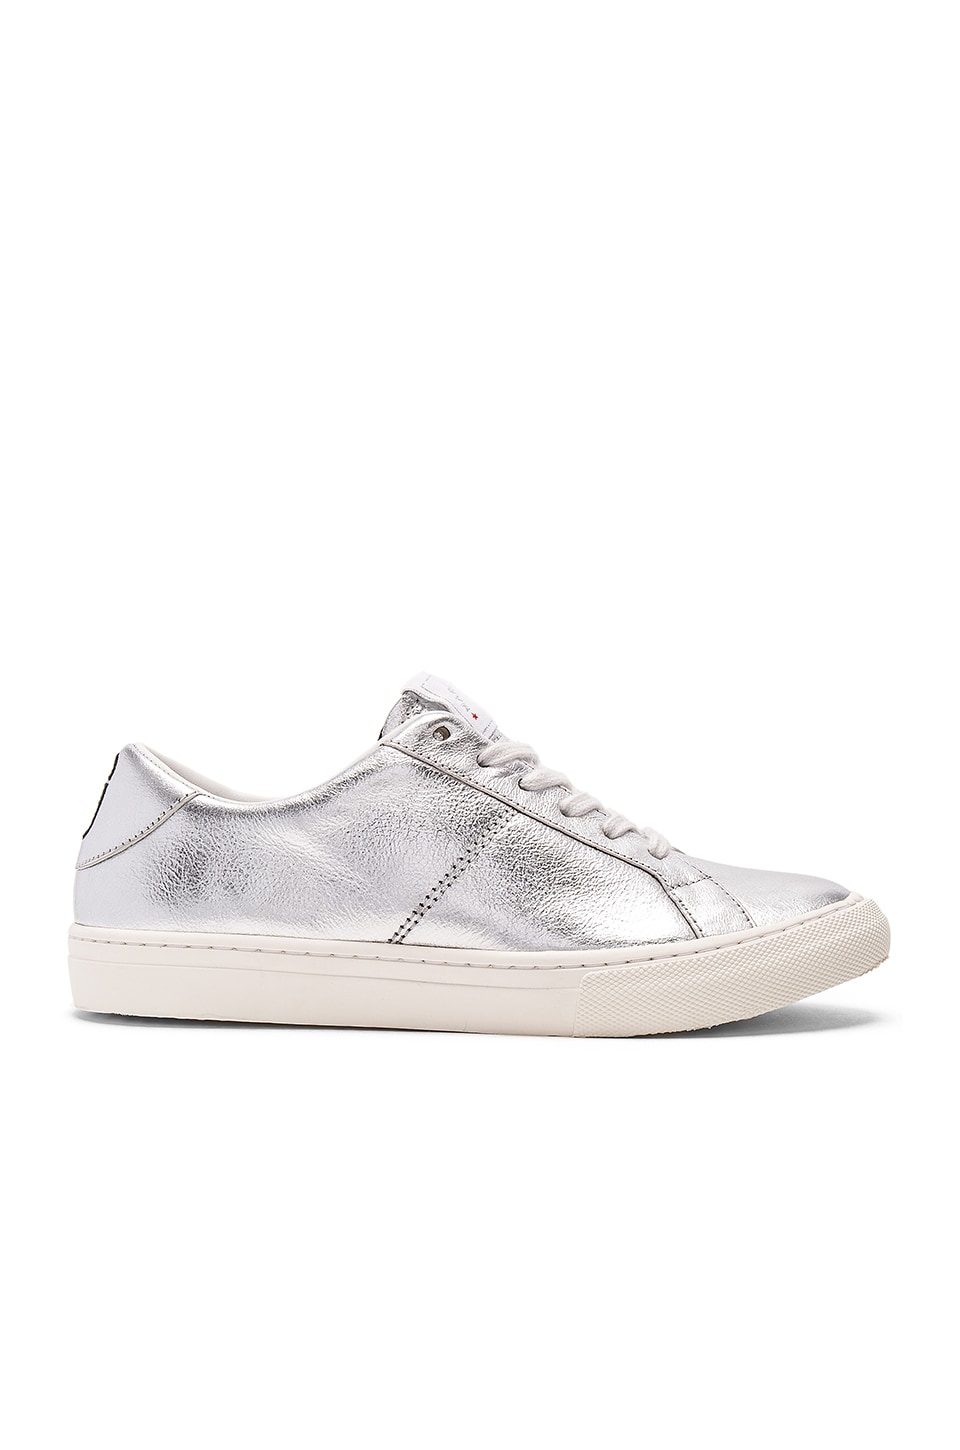 marc jacobs empire sneakers